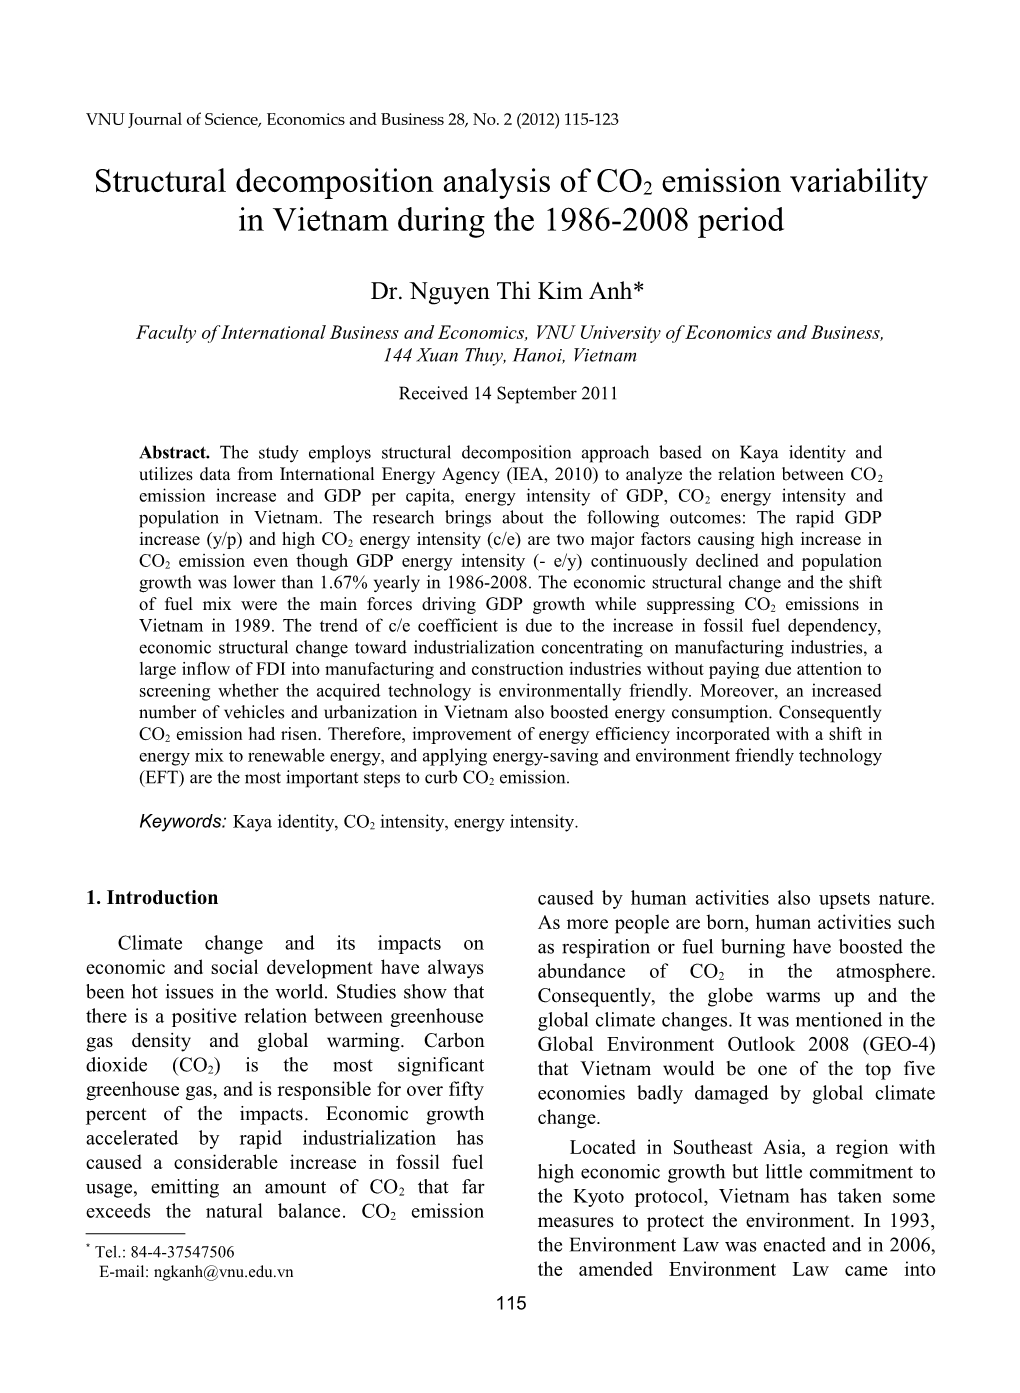 N.T.K. Anh / VNU Journal of Science, Economics and Business 28, No. 2 (2012) 115-123